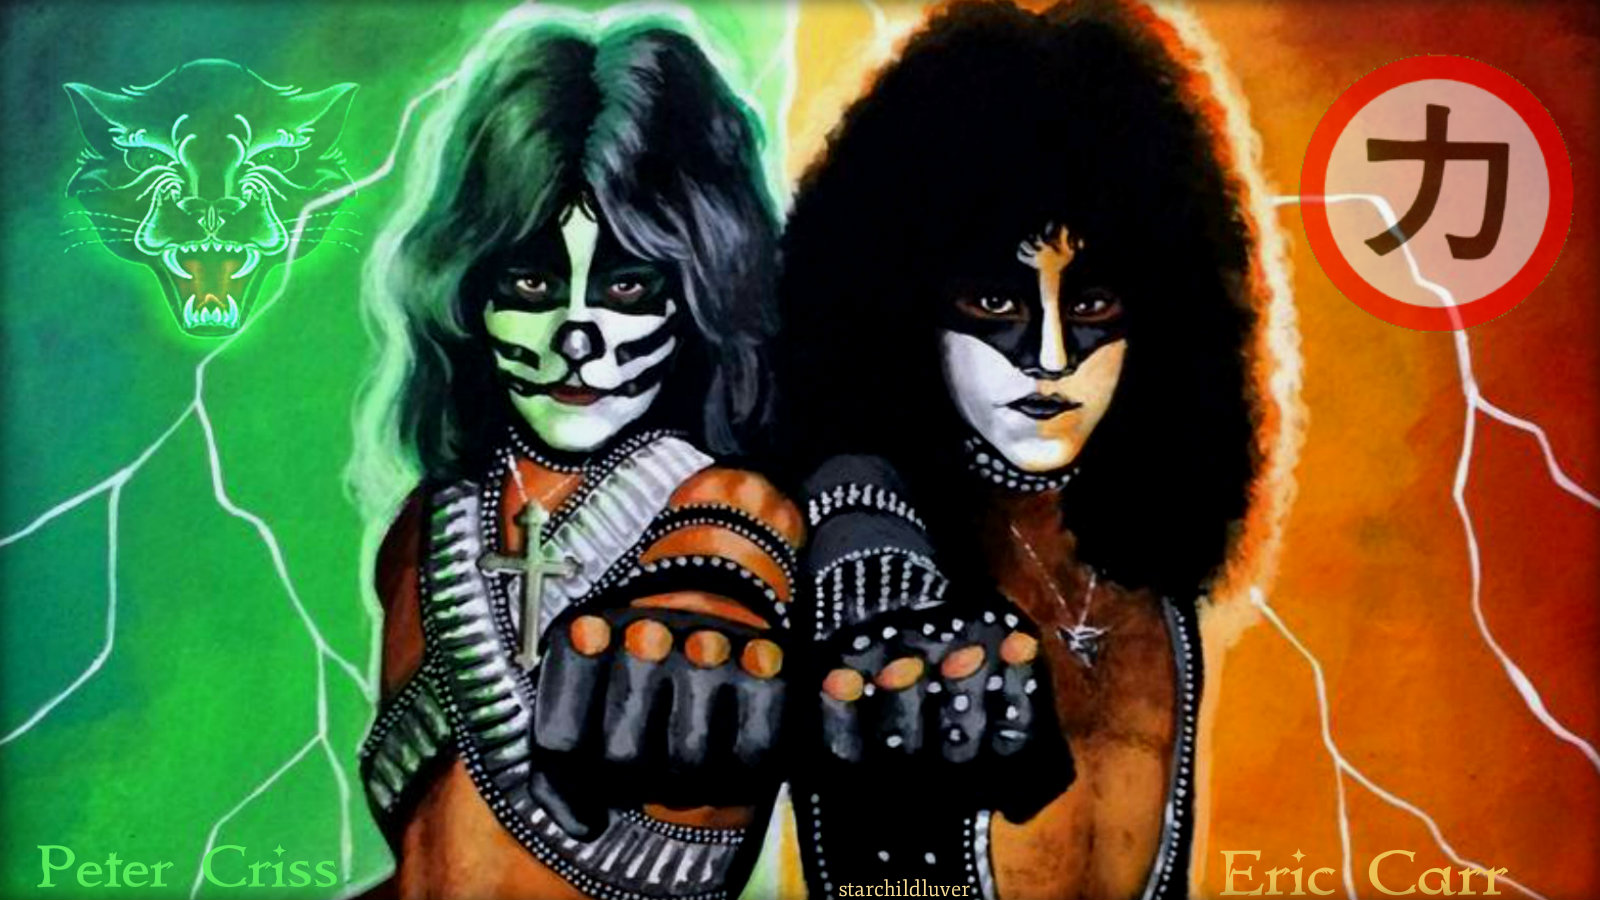 Legendary Kiss Drummer Peter Criss Pays Tribute To Eric Carr